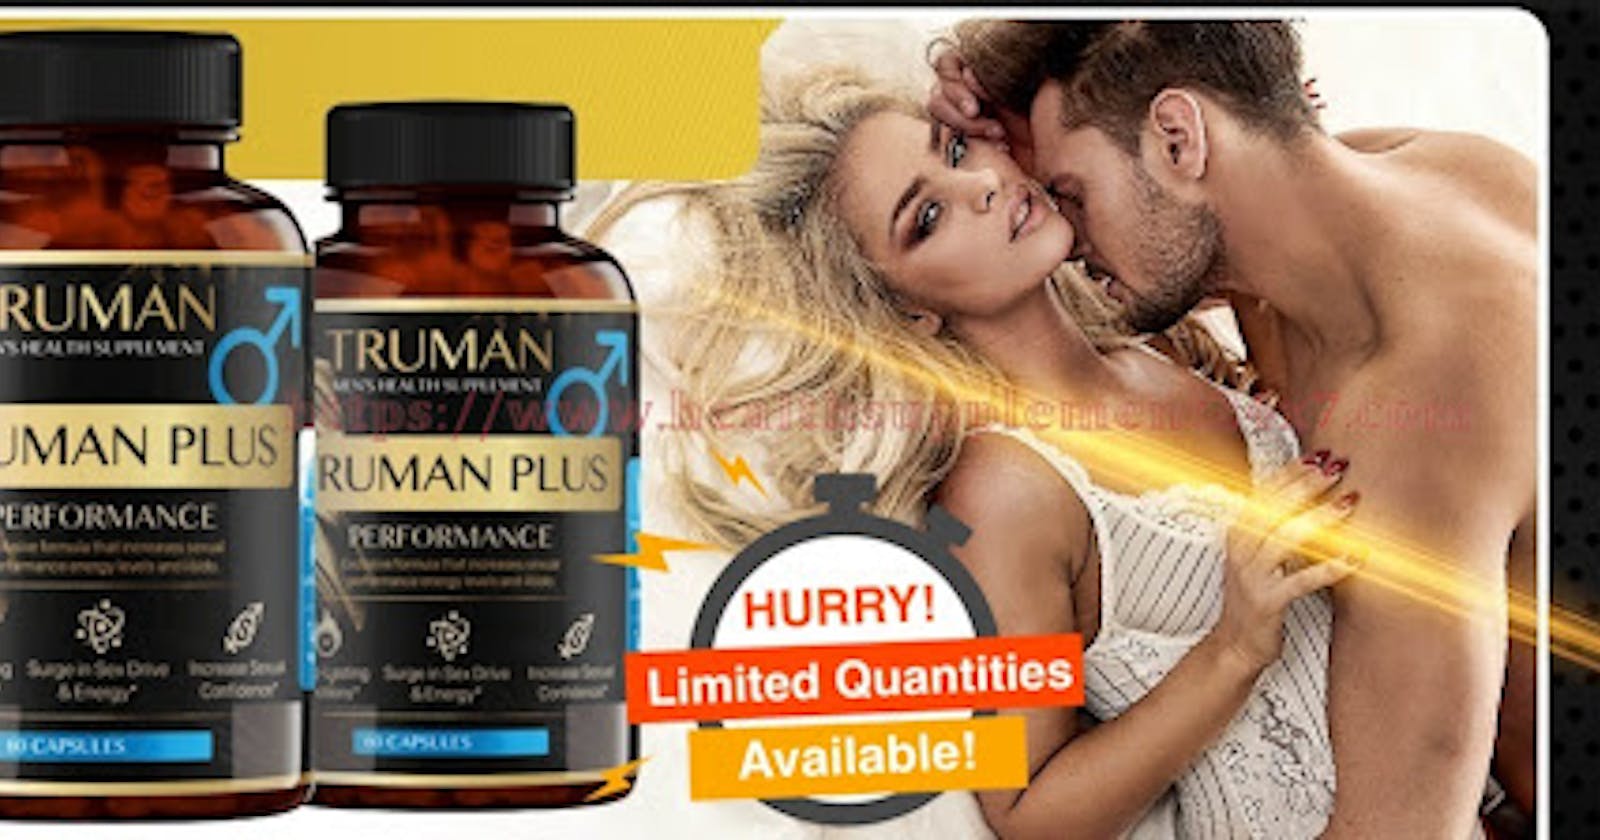 Biolife CBD Gummies Male Enhancement: A Natural Way to Improve Your Health?